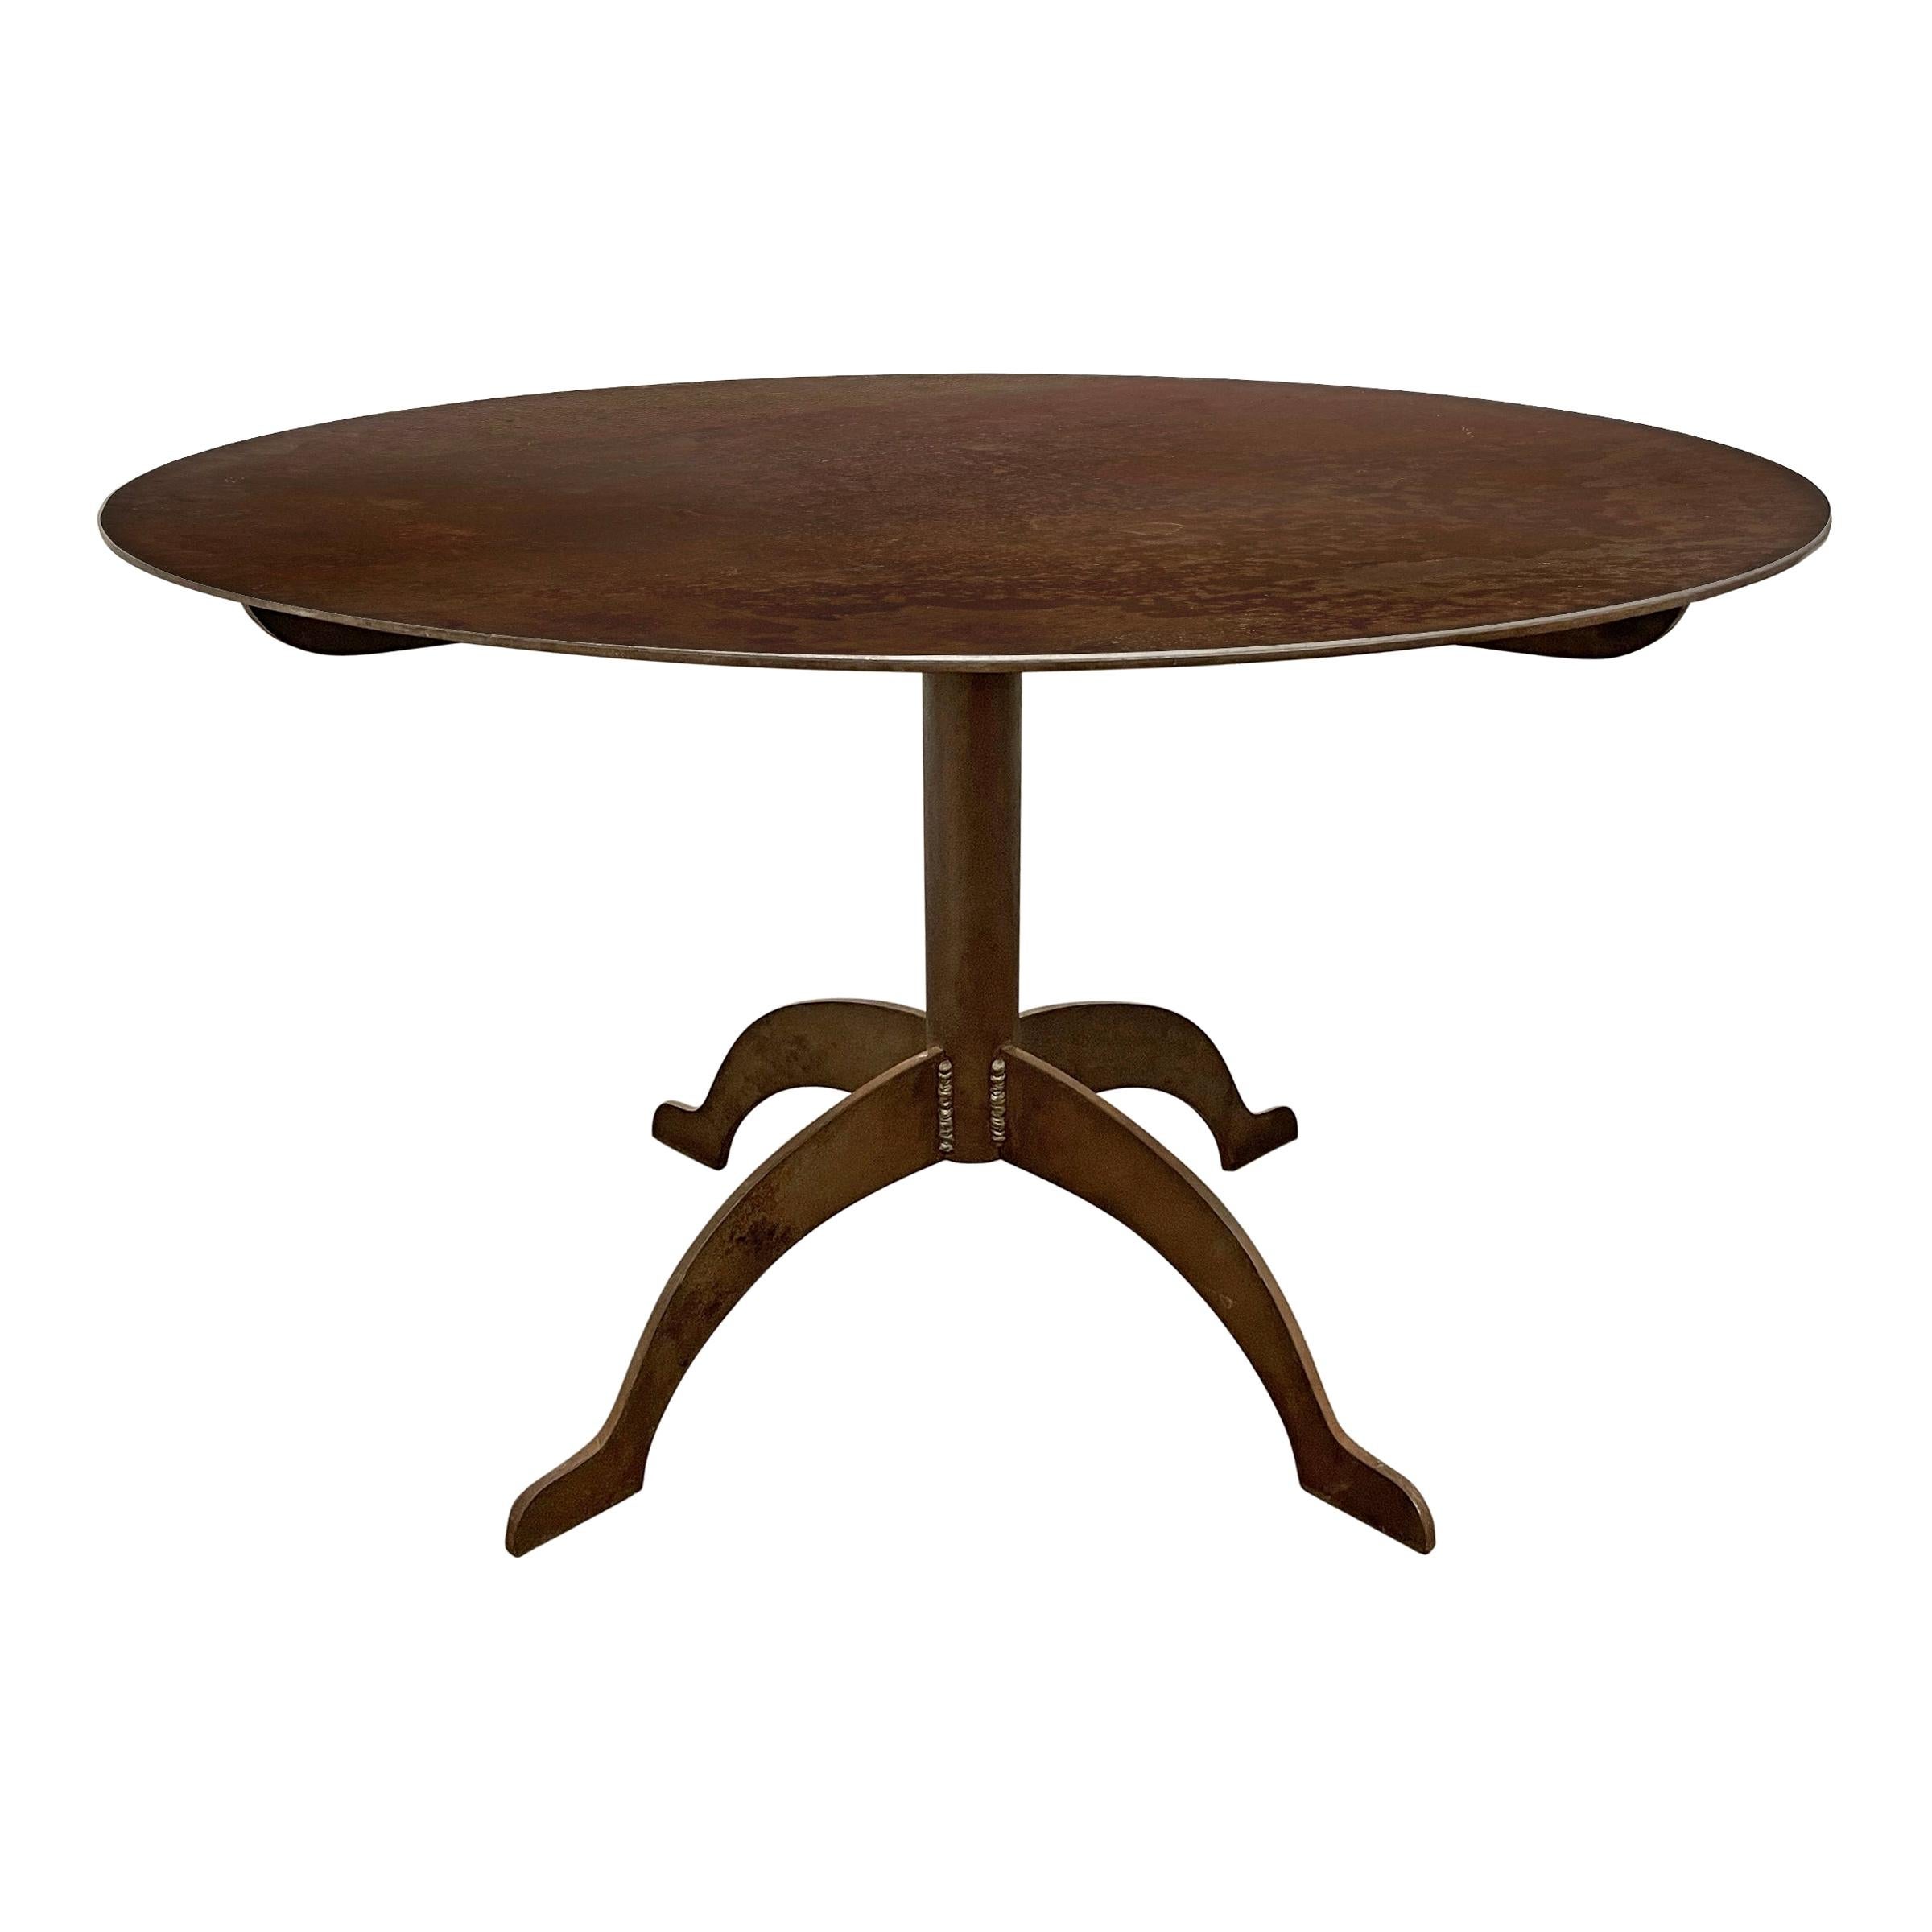 Shaker-Inspired Steel Round Dining Table